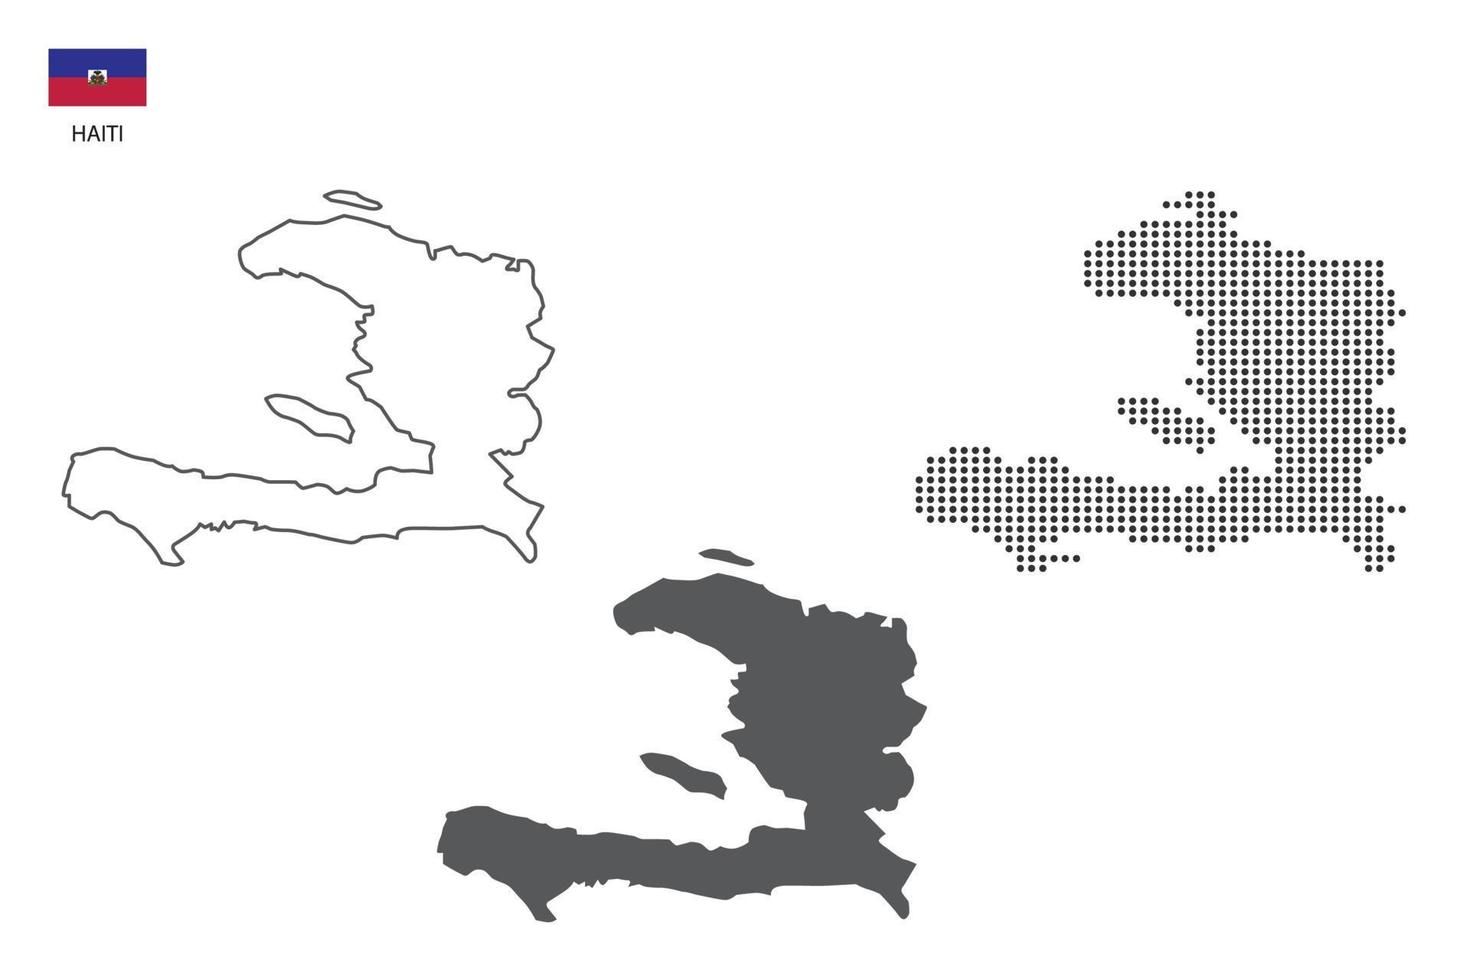 3 versions of Haiti map city vector by thin black outline simplicity style, Black dot style and Dark shadow style. All in the white background.